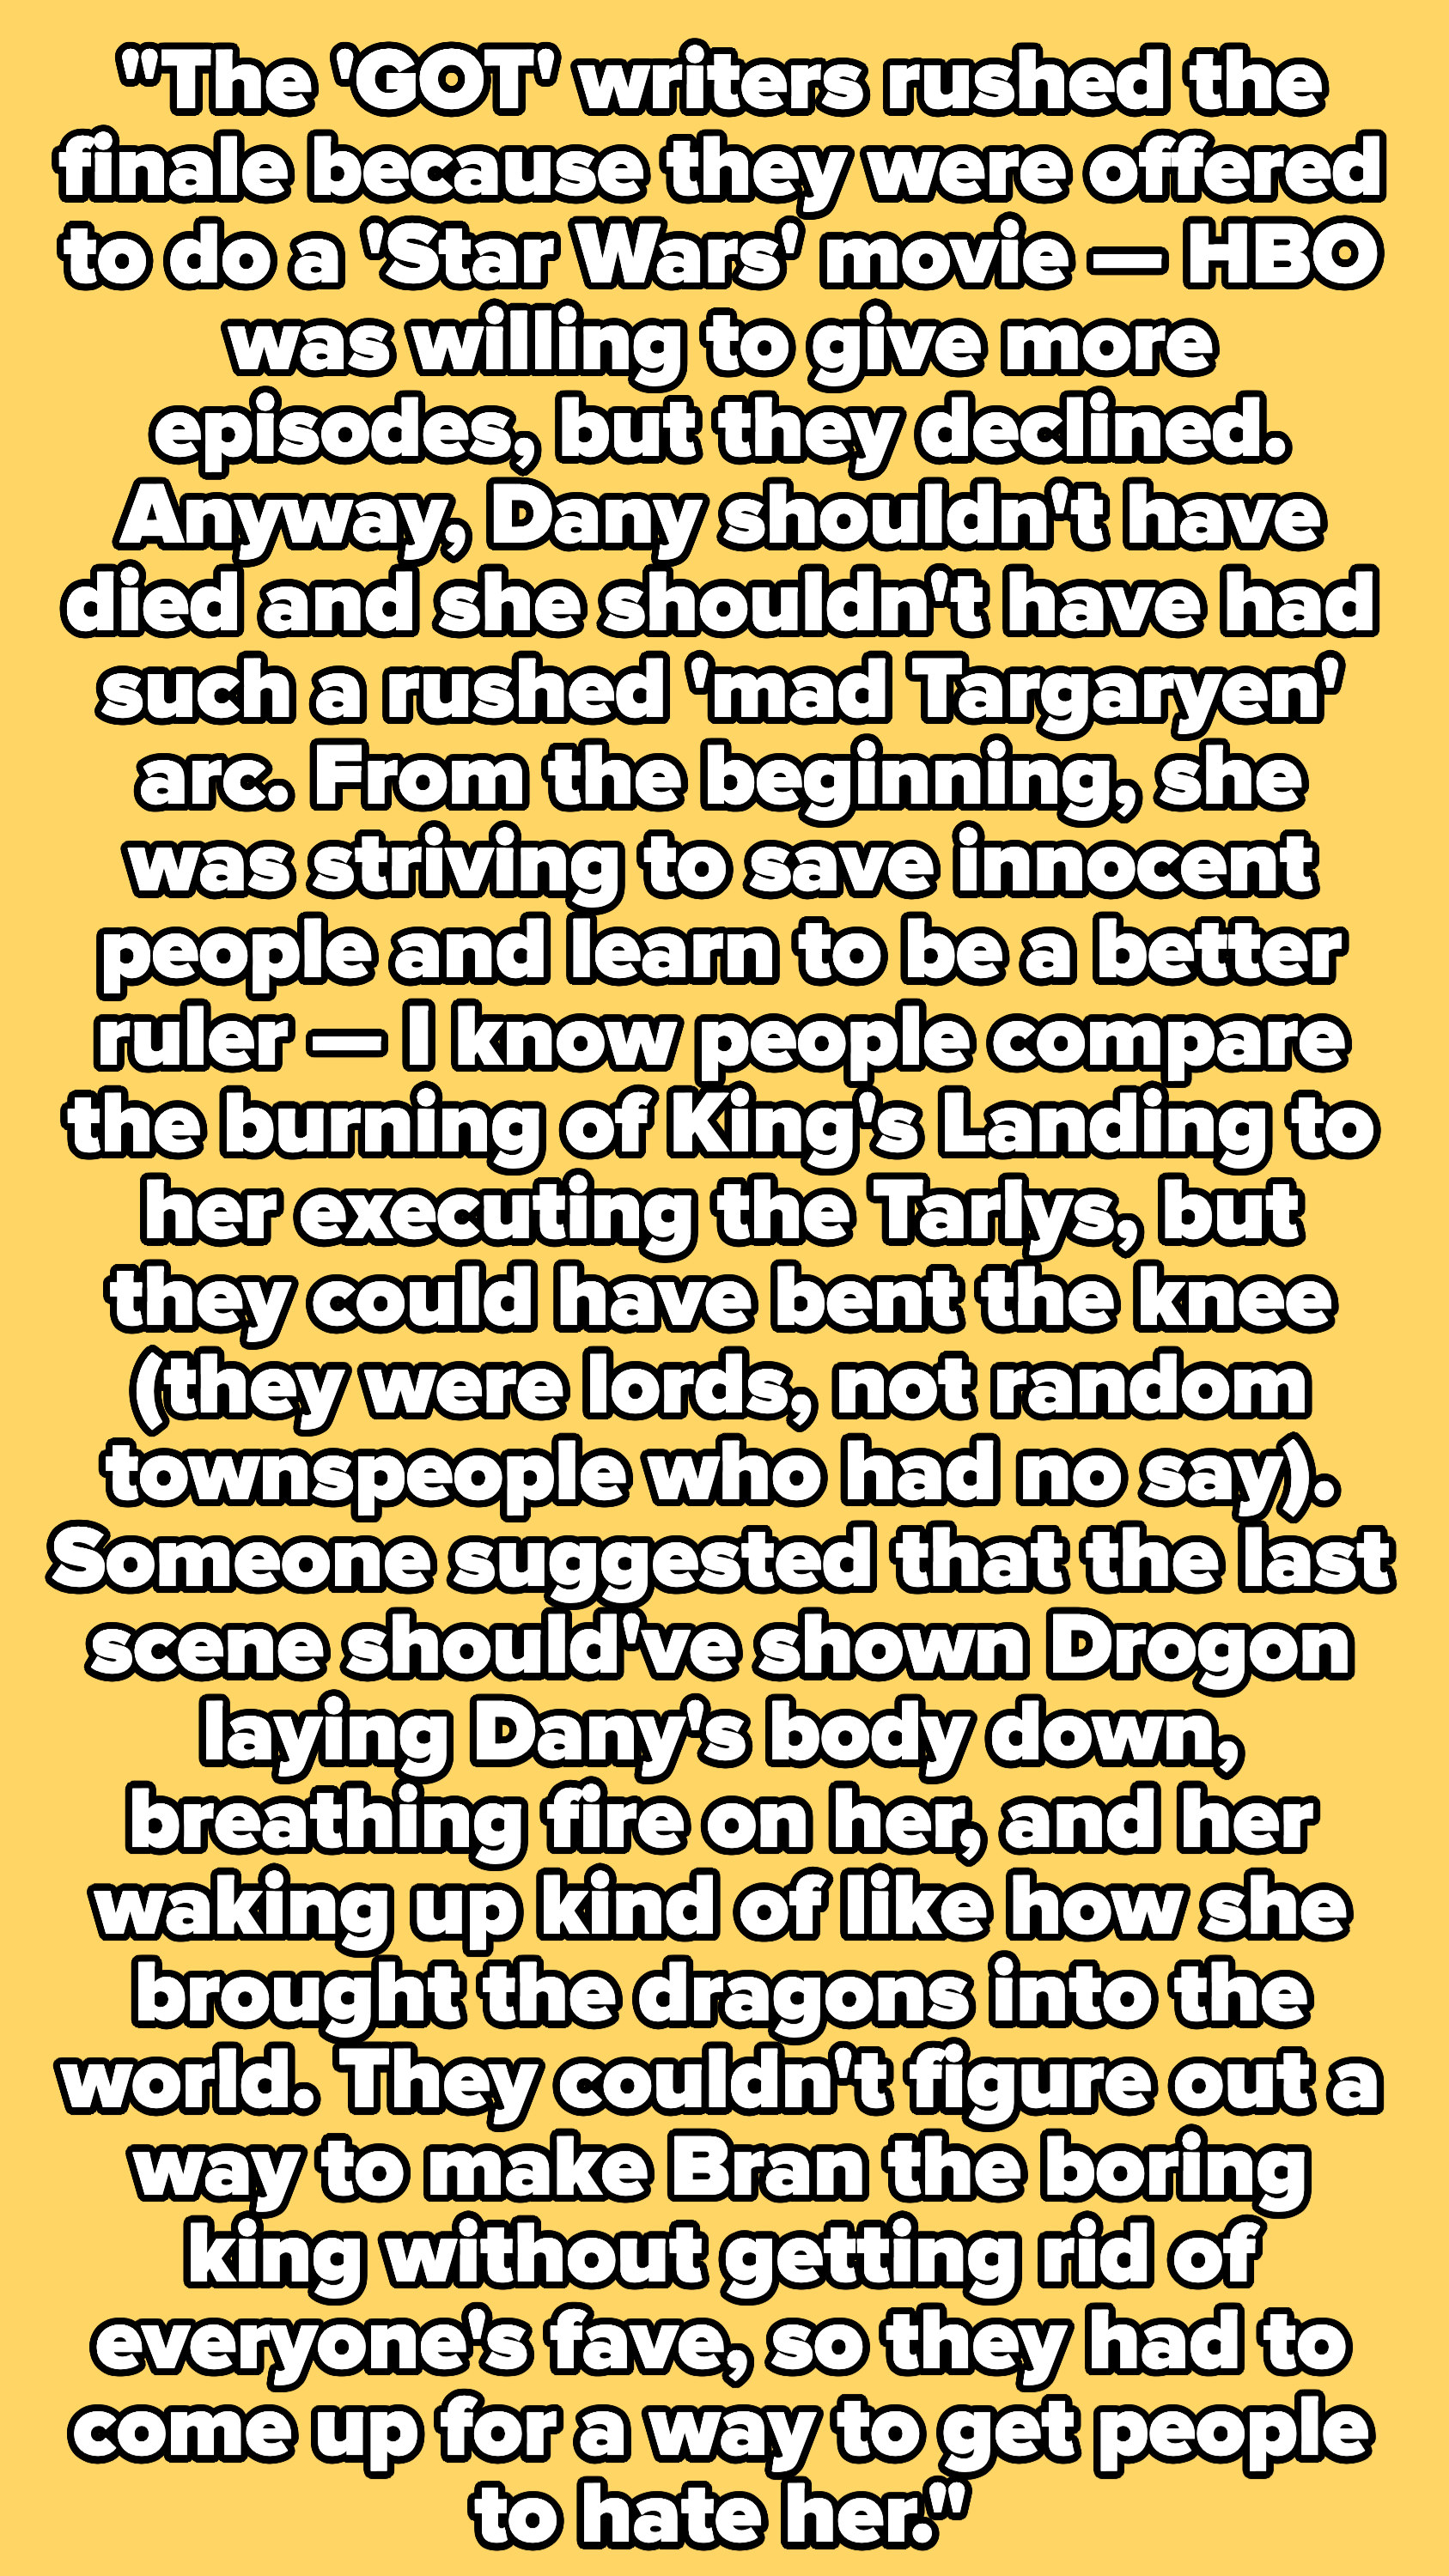 &quot;Someone suggested that the last scene should&#x27;ve shown Drogon laying Dany&#x27;s body down, breathing fire on her, and her waking up, kind of like how she brought the dragons into the world.&quot;